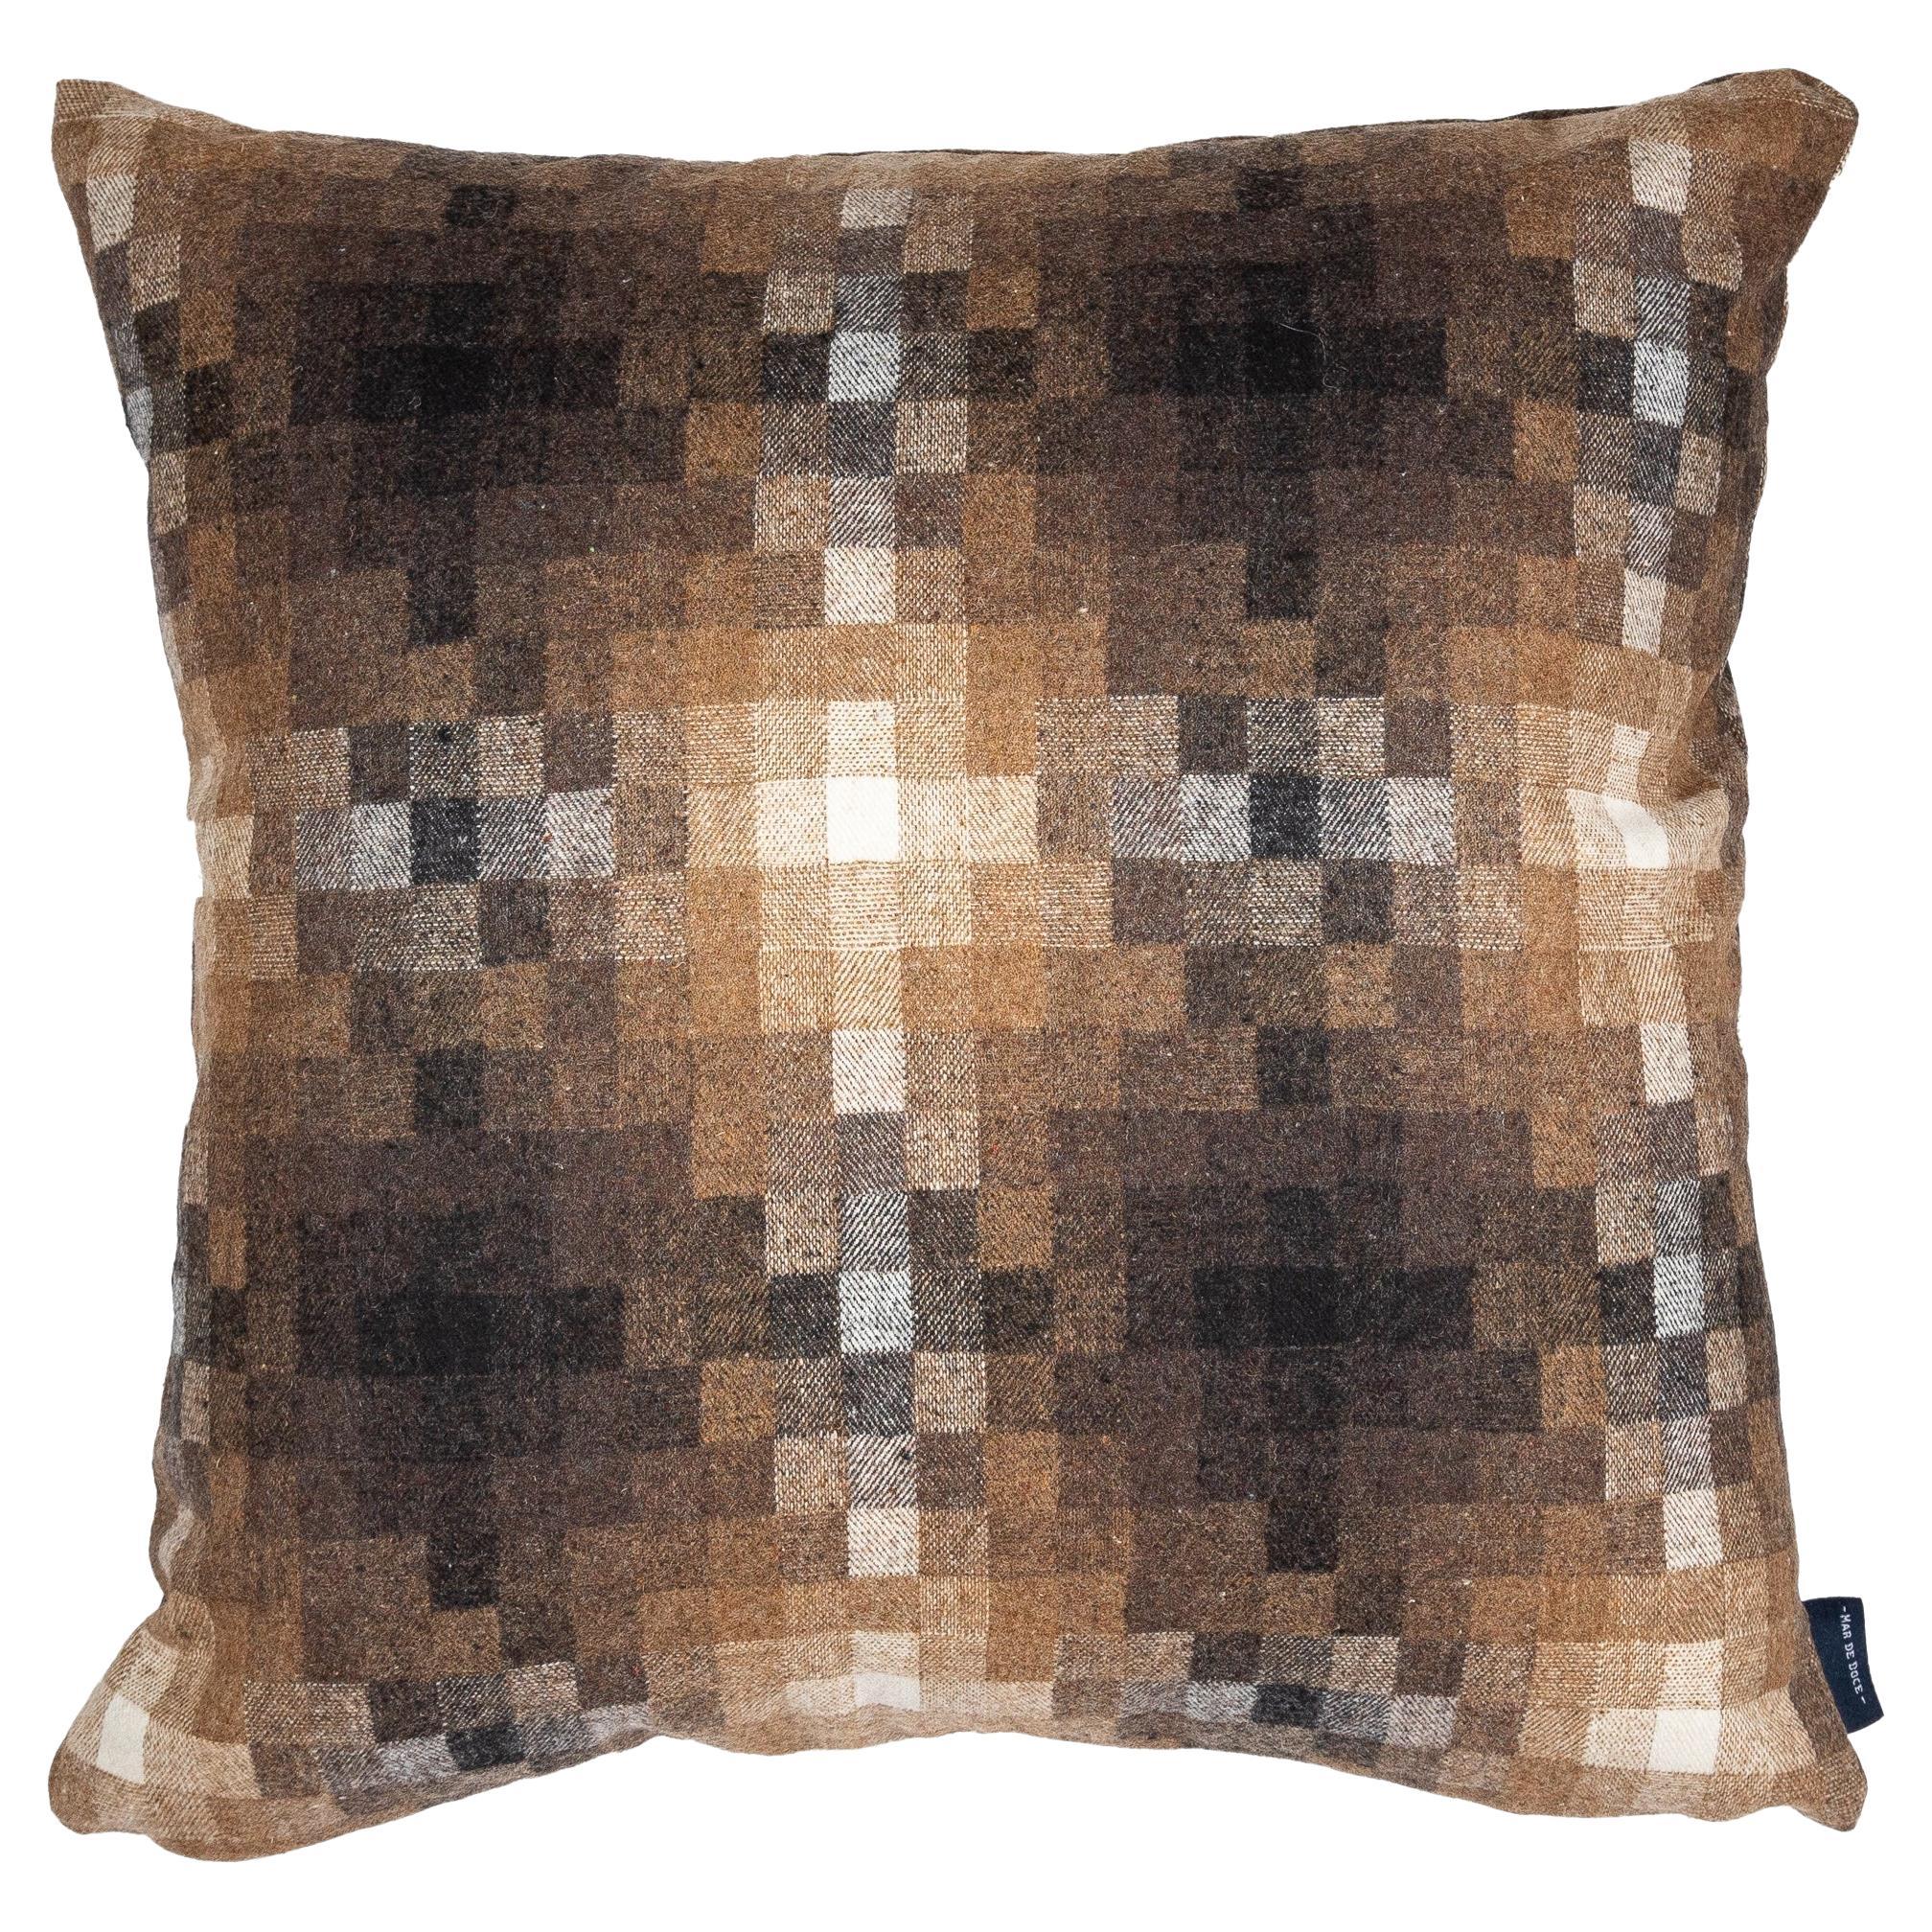 Wool blend luxury throw pillow in shades of brown- Arctic Mirage- by Mar de Doce For Sale